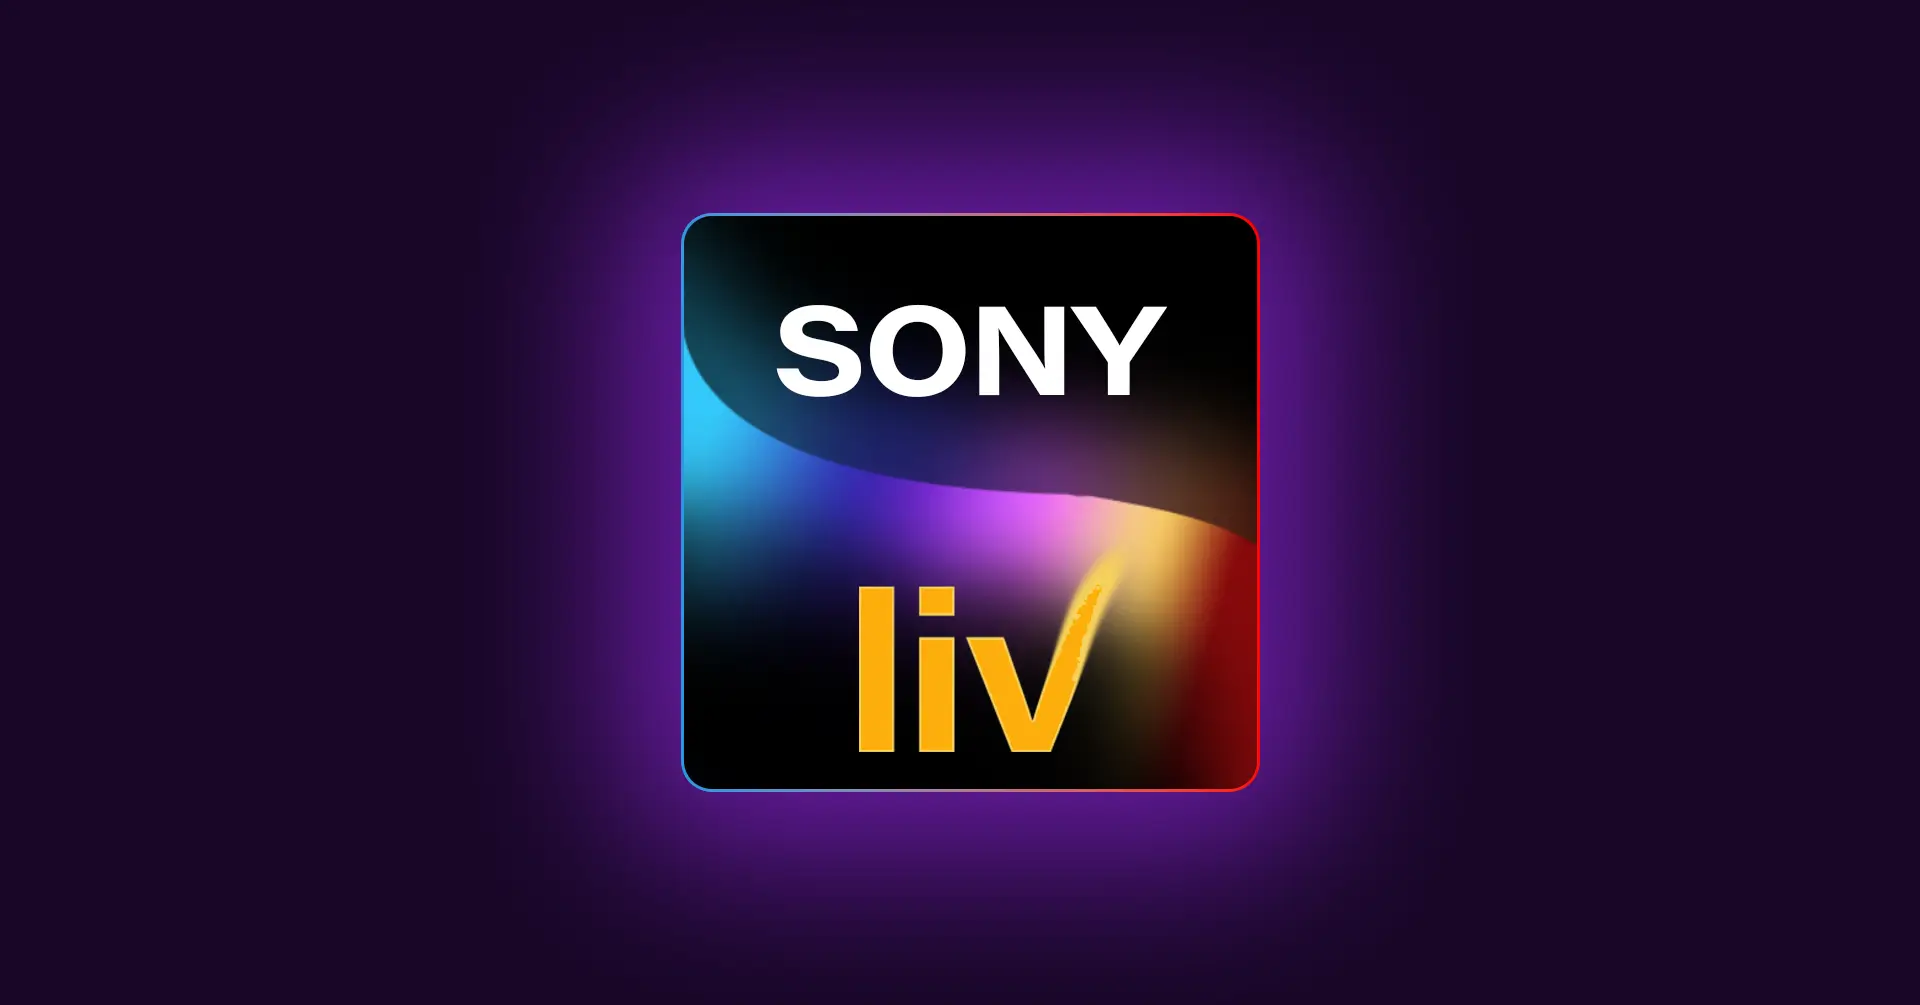 How To Activate SonyLive Via sonyliv.com/activate